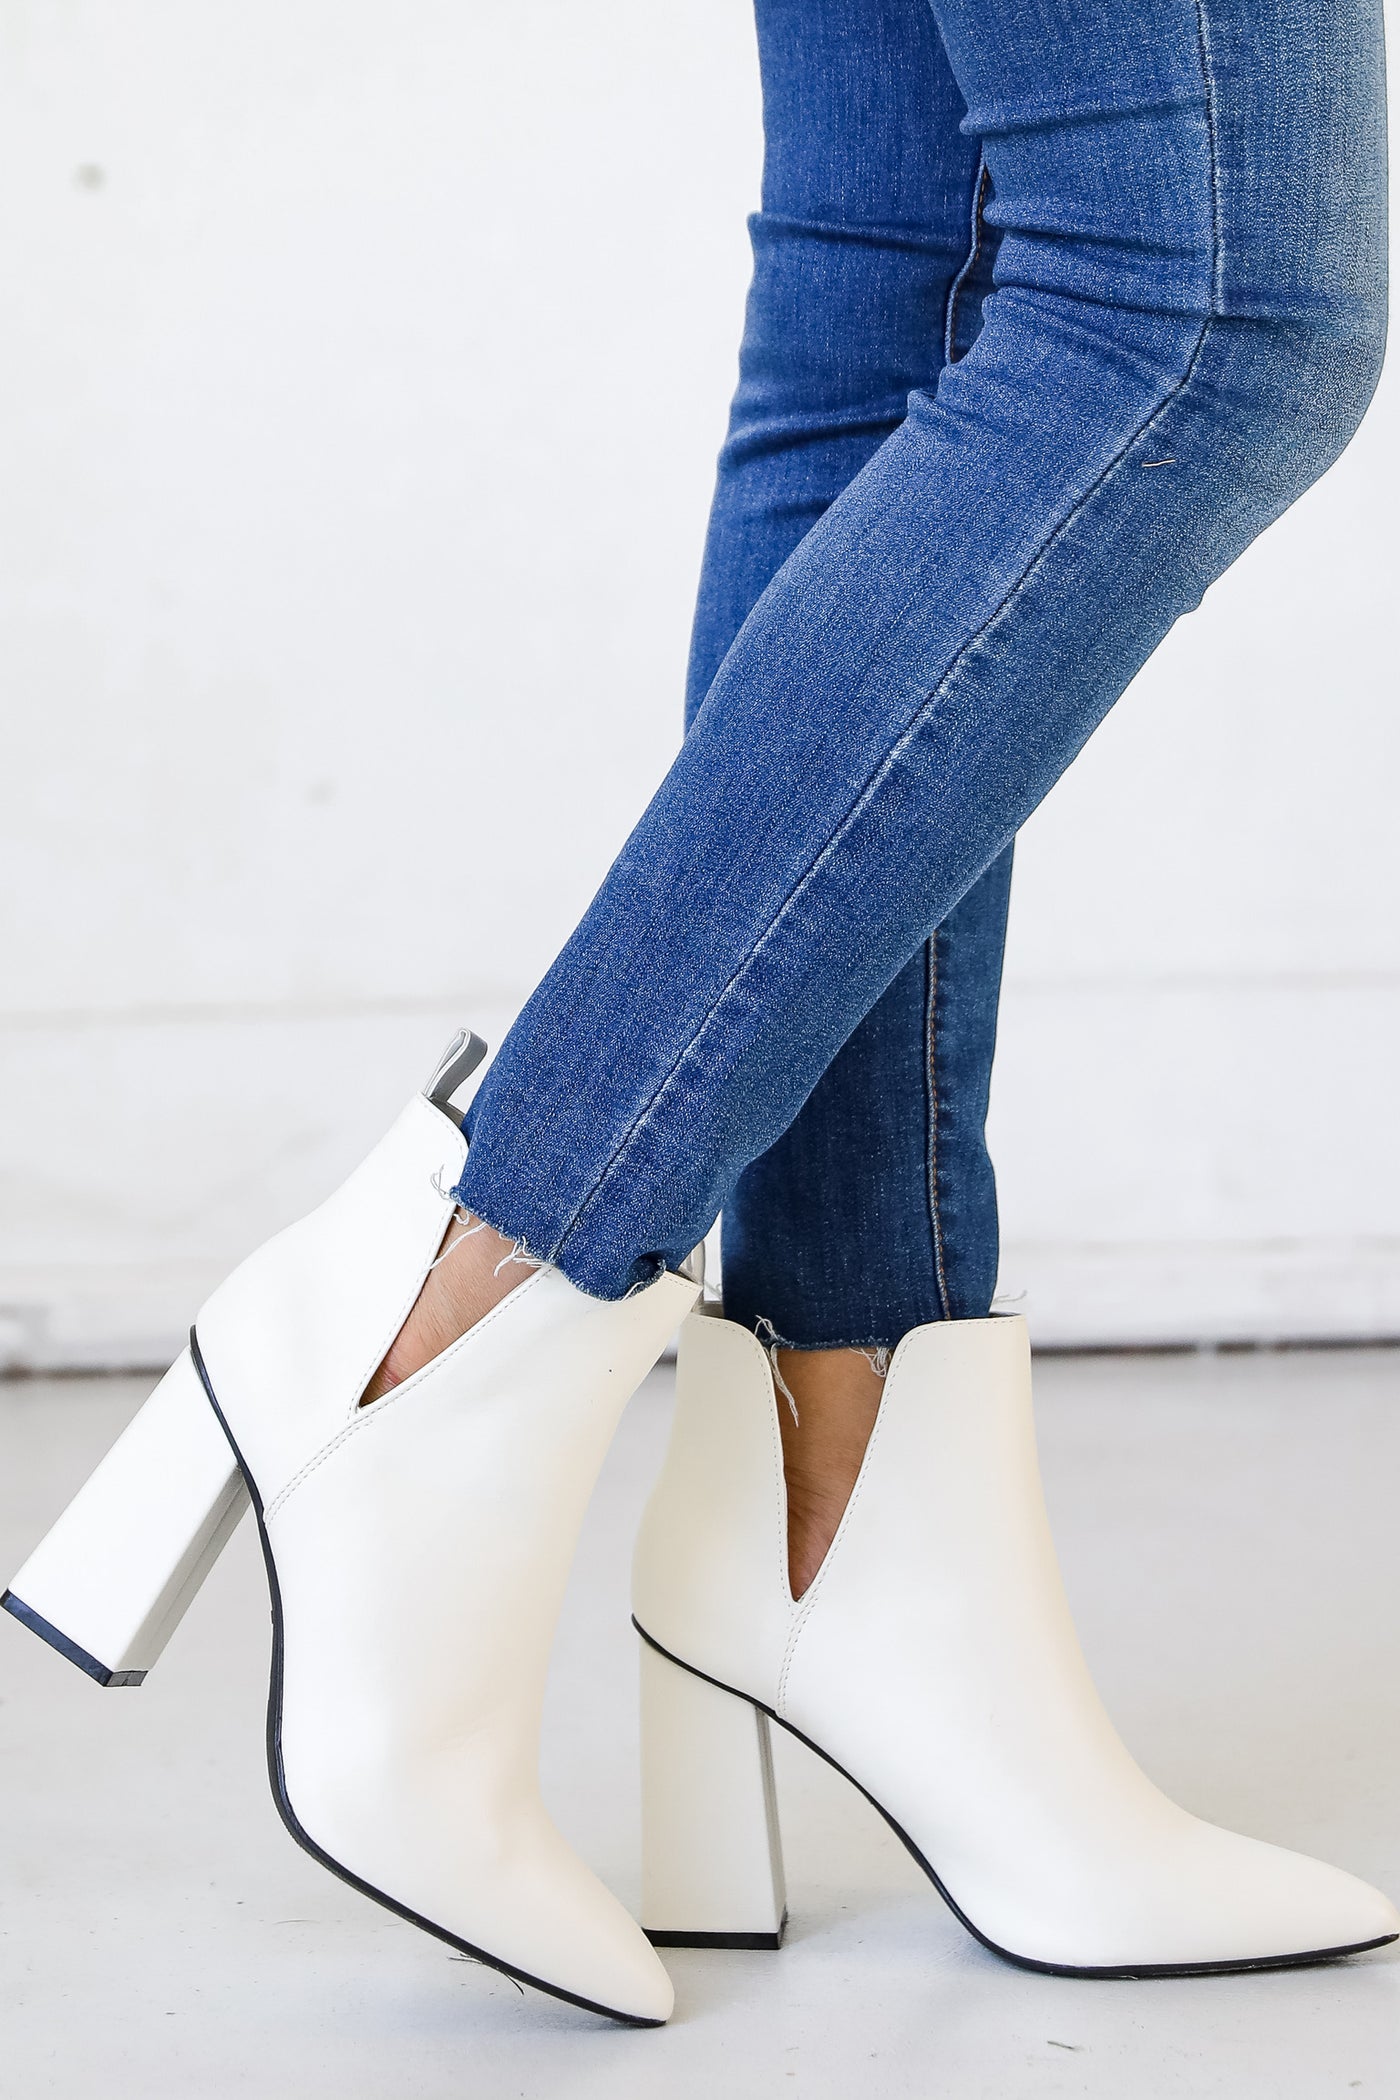 Ankle Booties in white side view